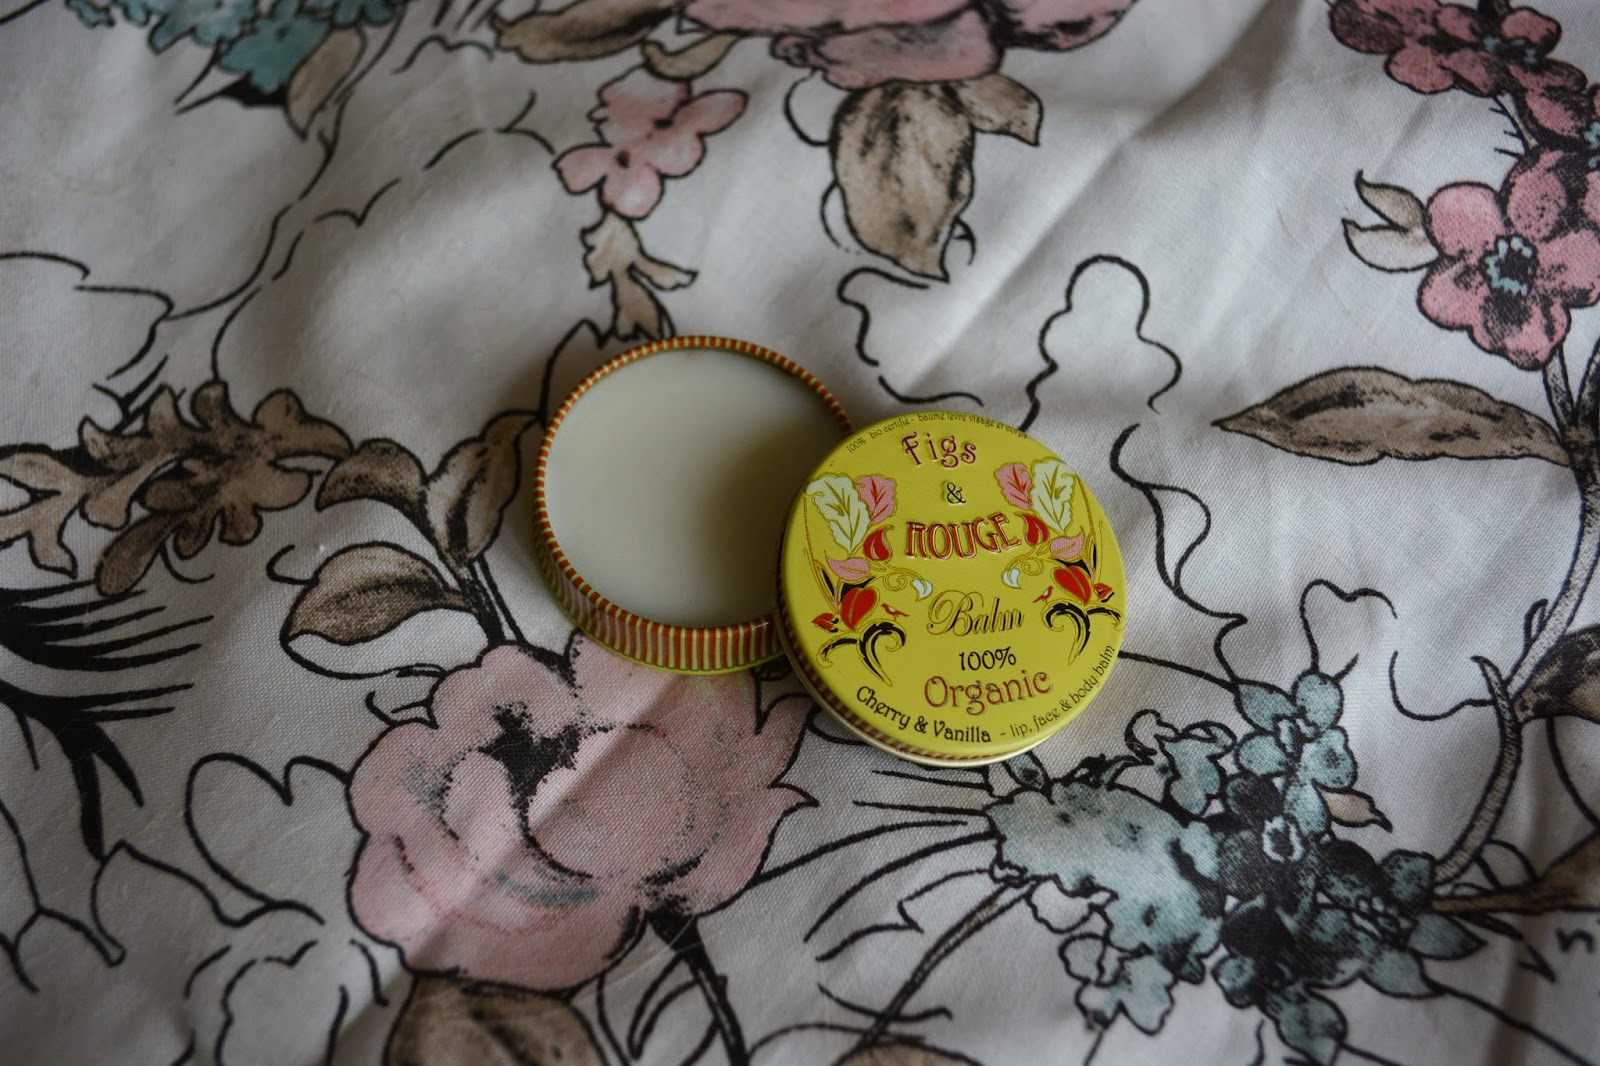 Lips & Rouge lip balm, lip balm, Figs and rouge lip balm, figs and rouge, figs & rouge